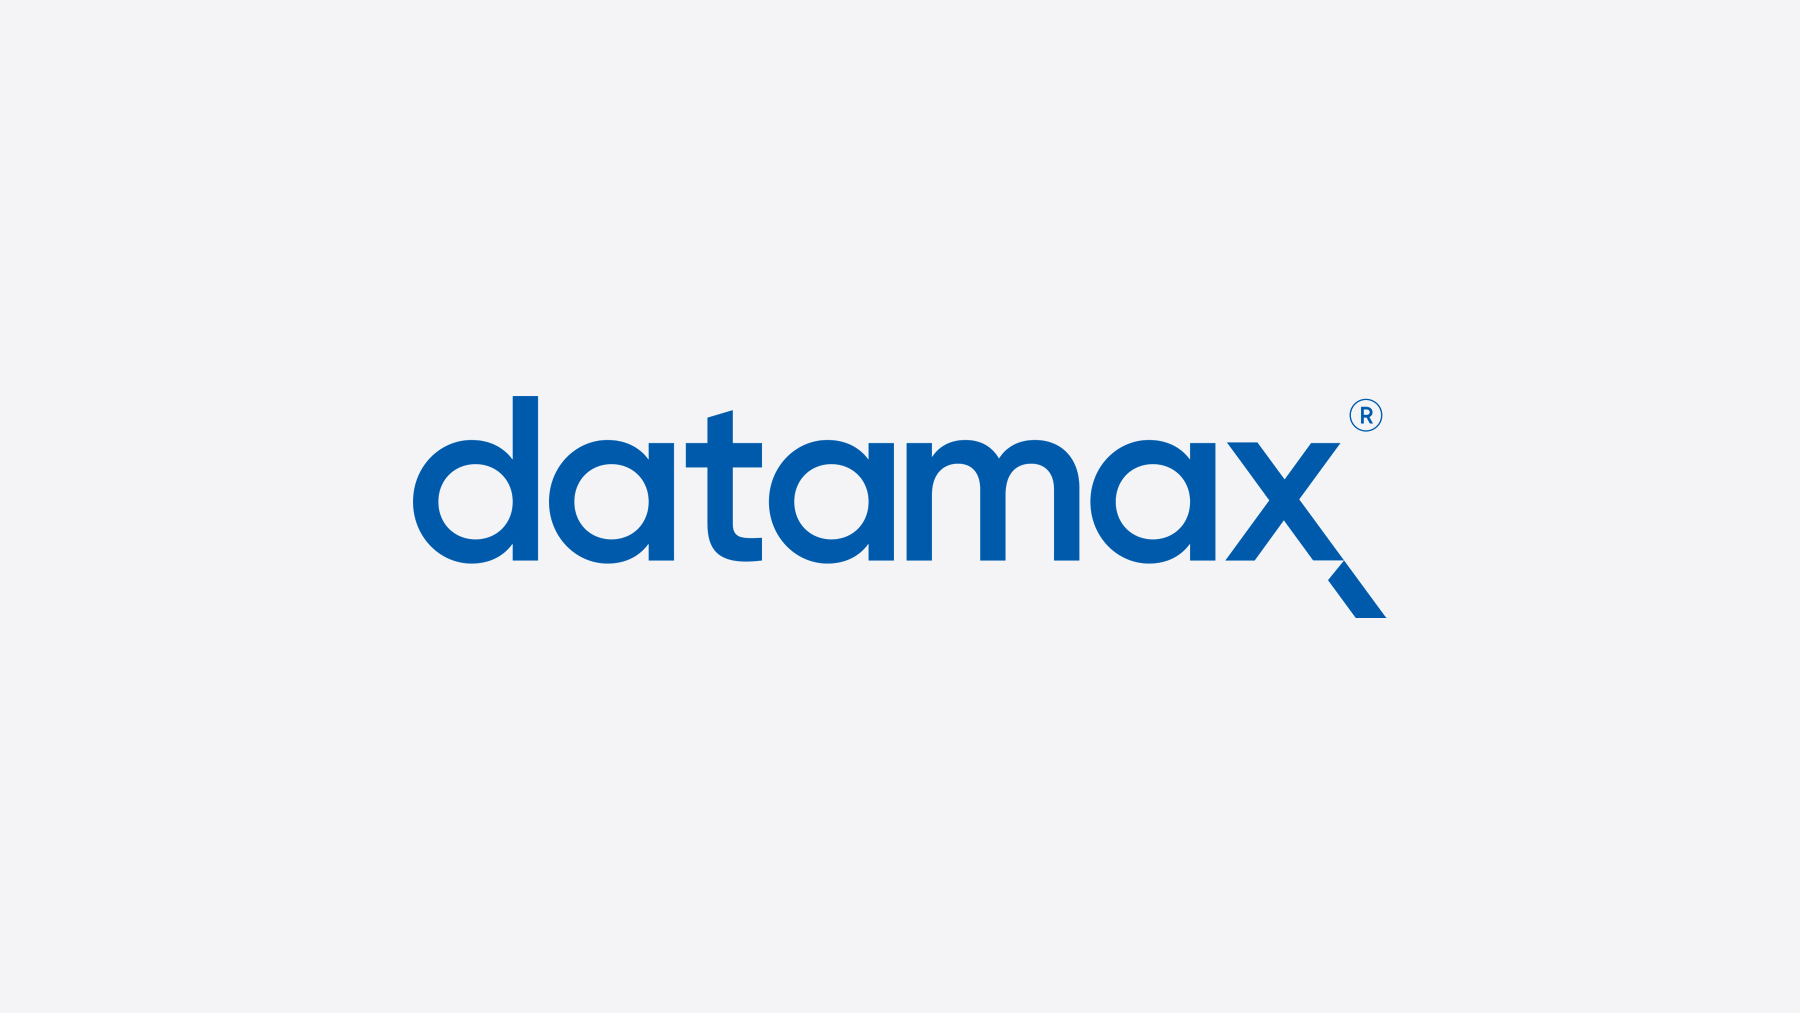 Datamax brand identity design on an off-white background.